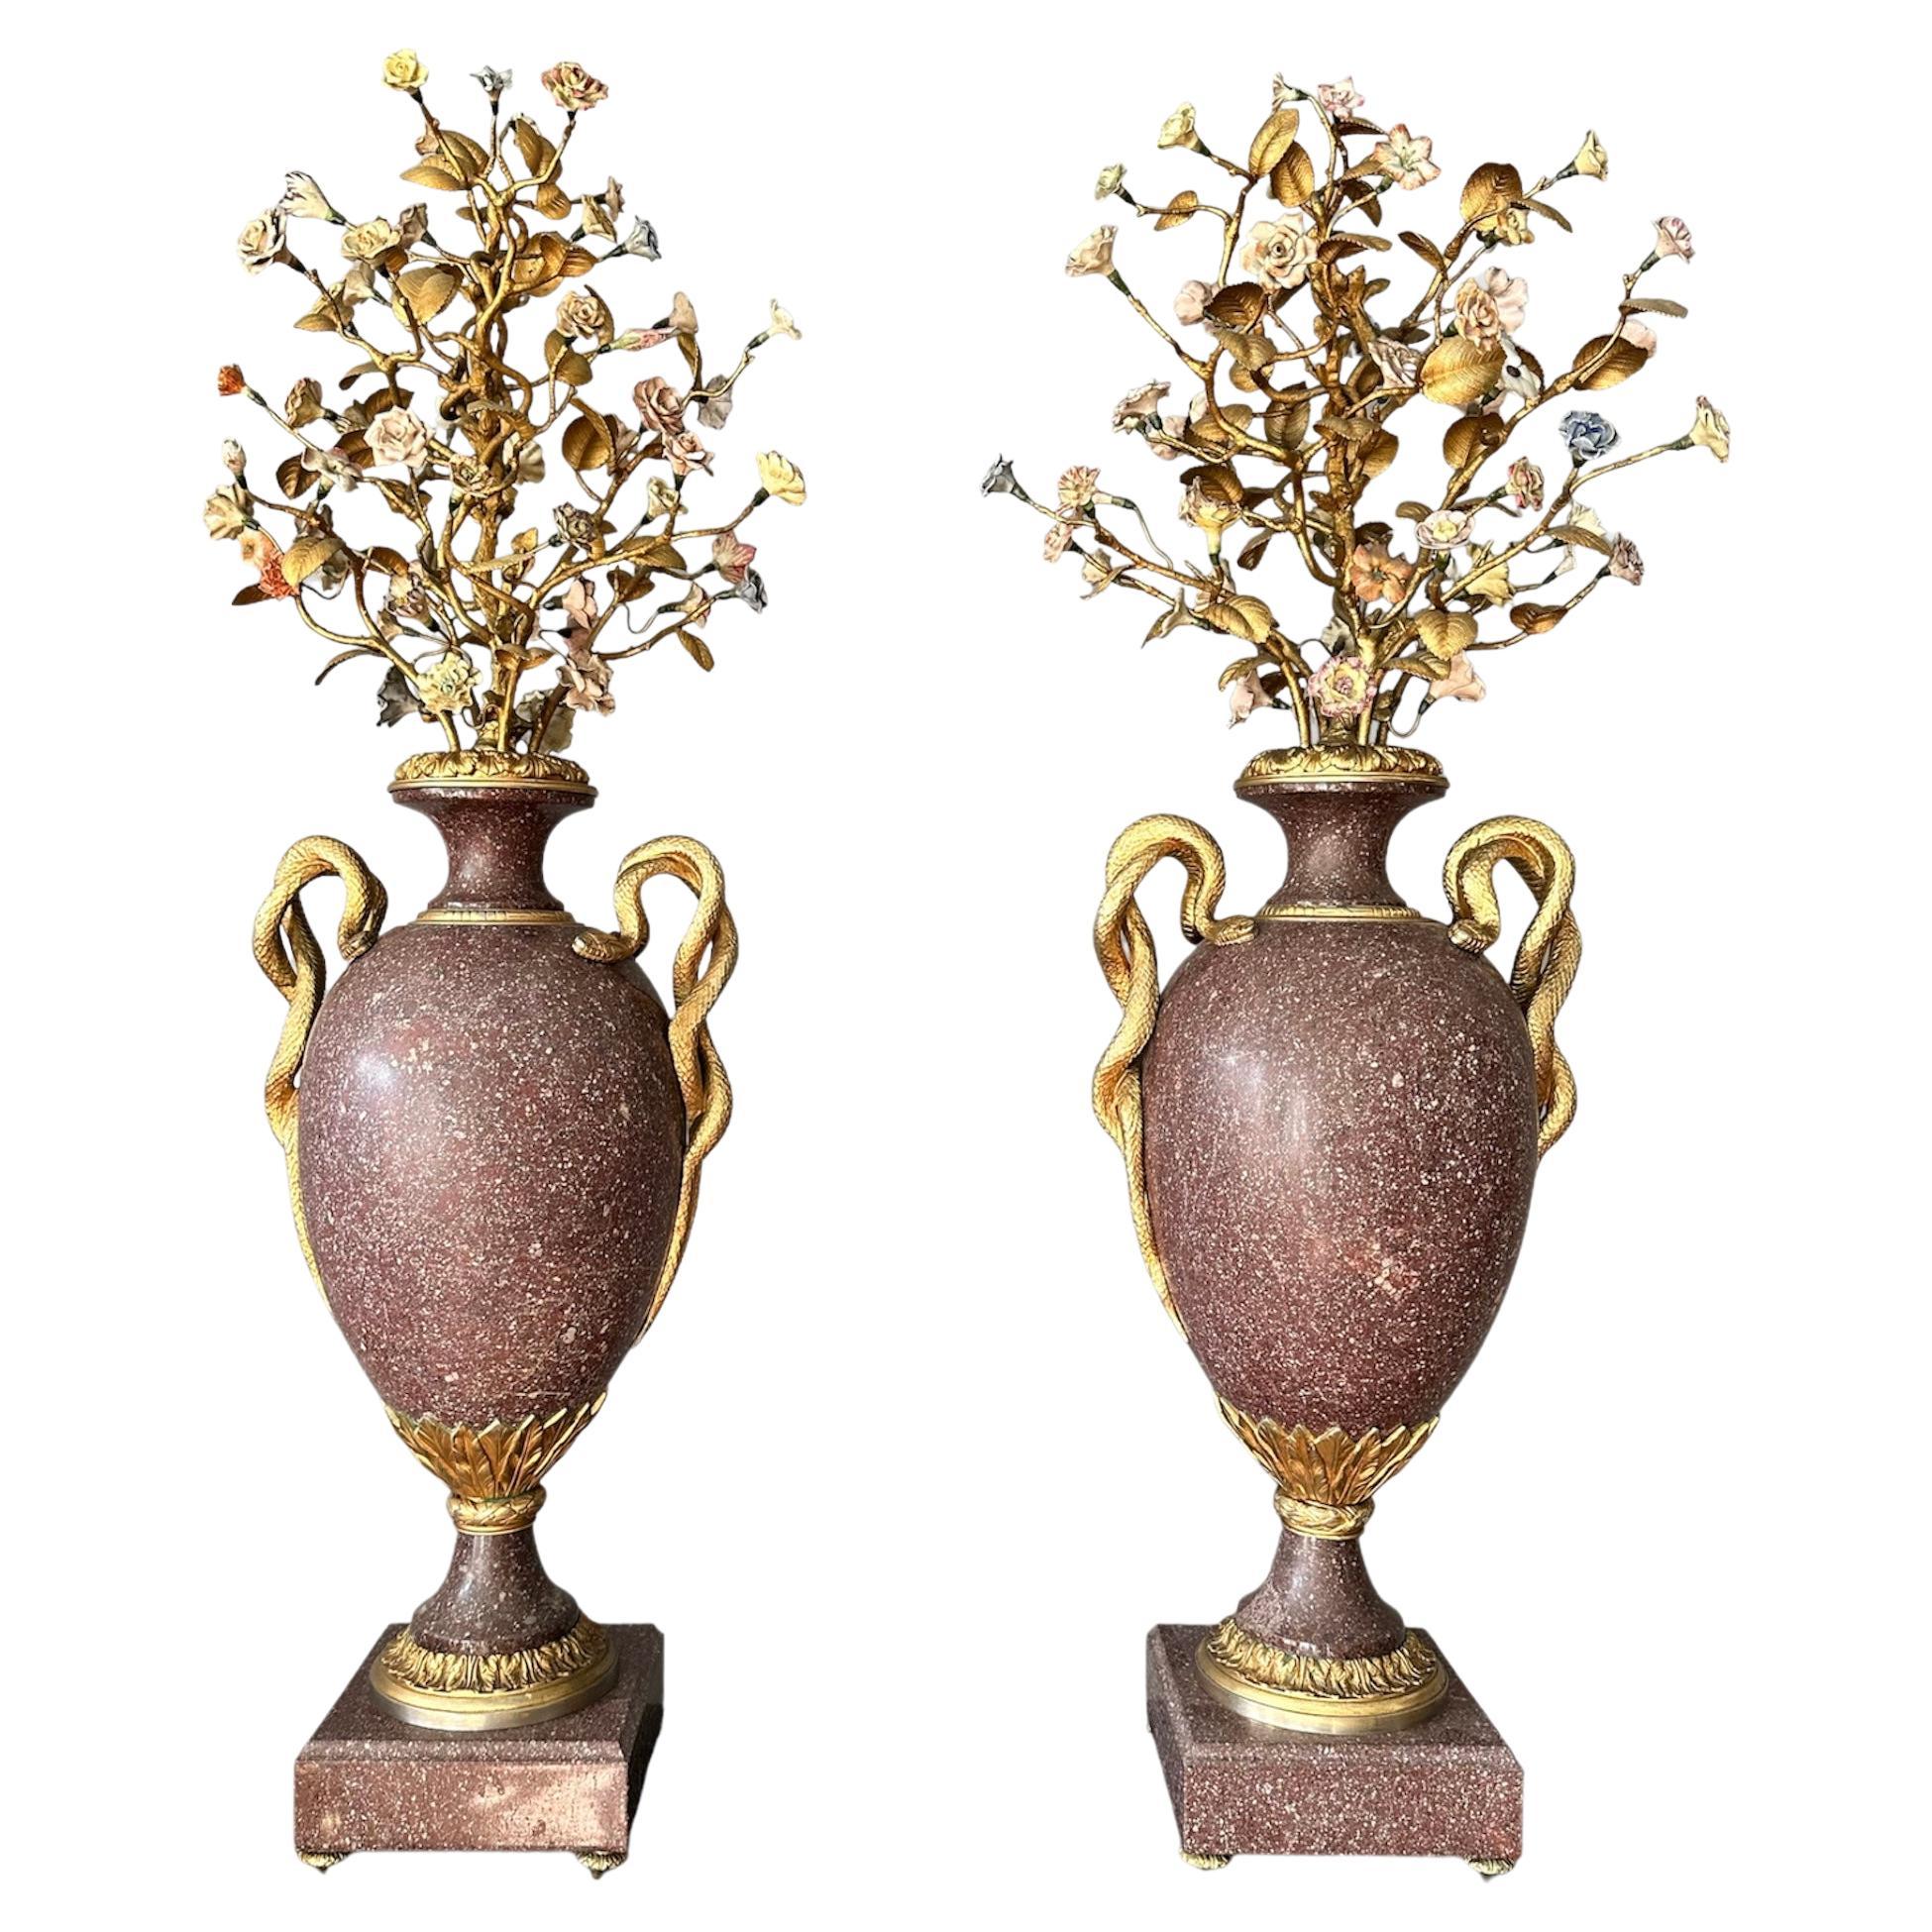 19th Century Pair of Egyptian Porphyry Vases and Vessels Porcelain Gilded Bronze For Sale